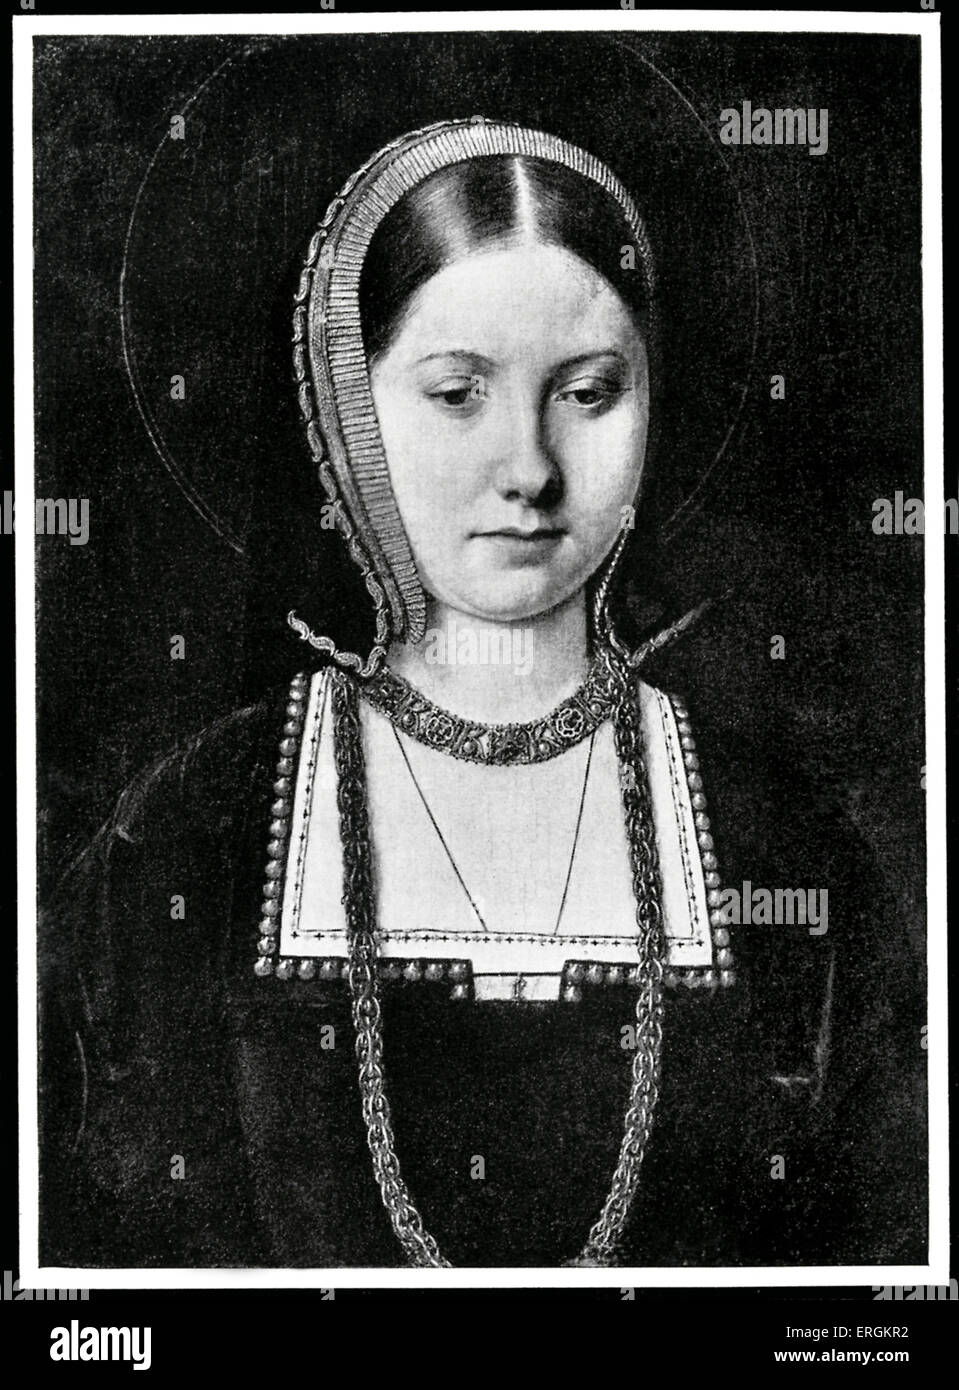 Catherine of Aragon (1485 - 1536). Queen consort of England (1509 - 1533) and first wife of    King Henry VIII (1491 - 1547). Stock Photo